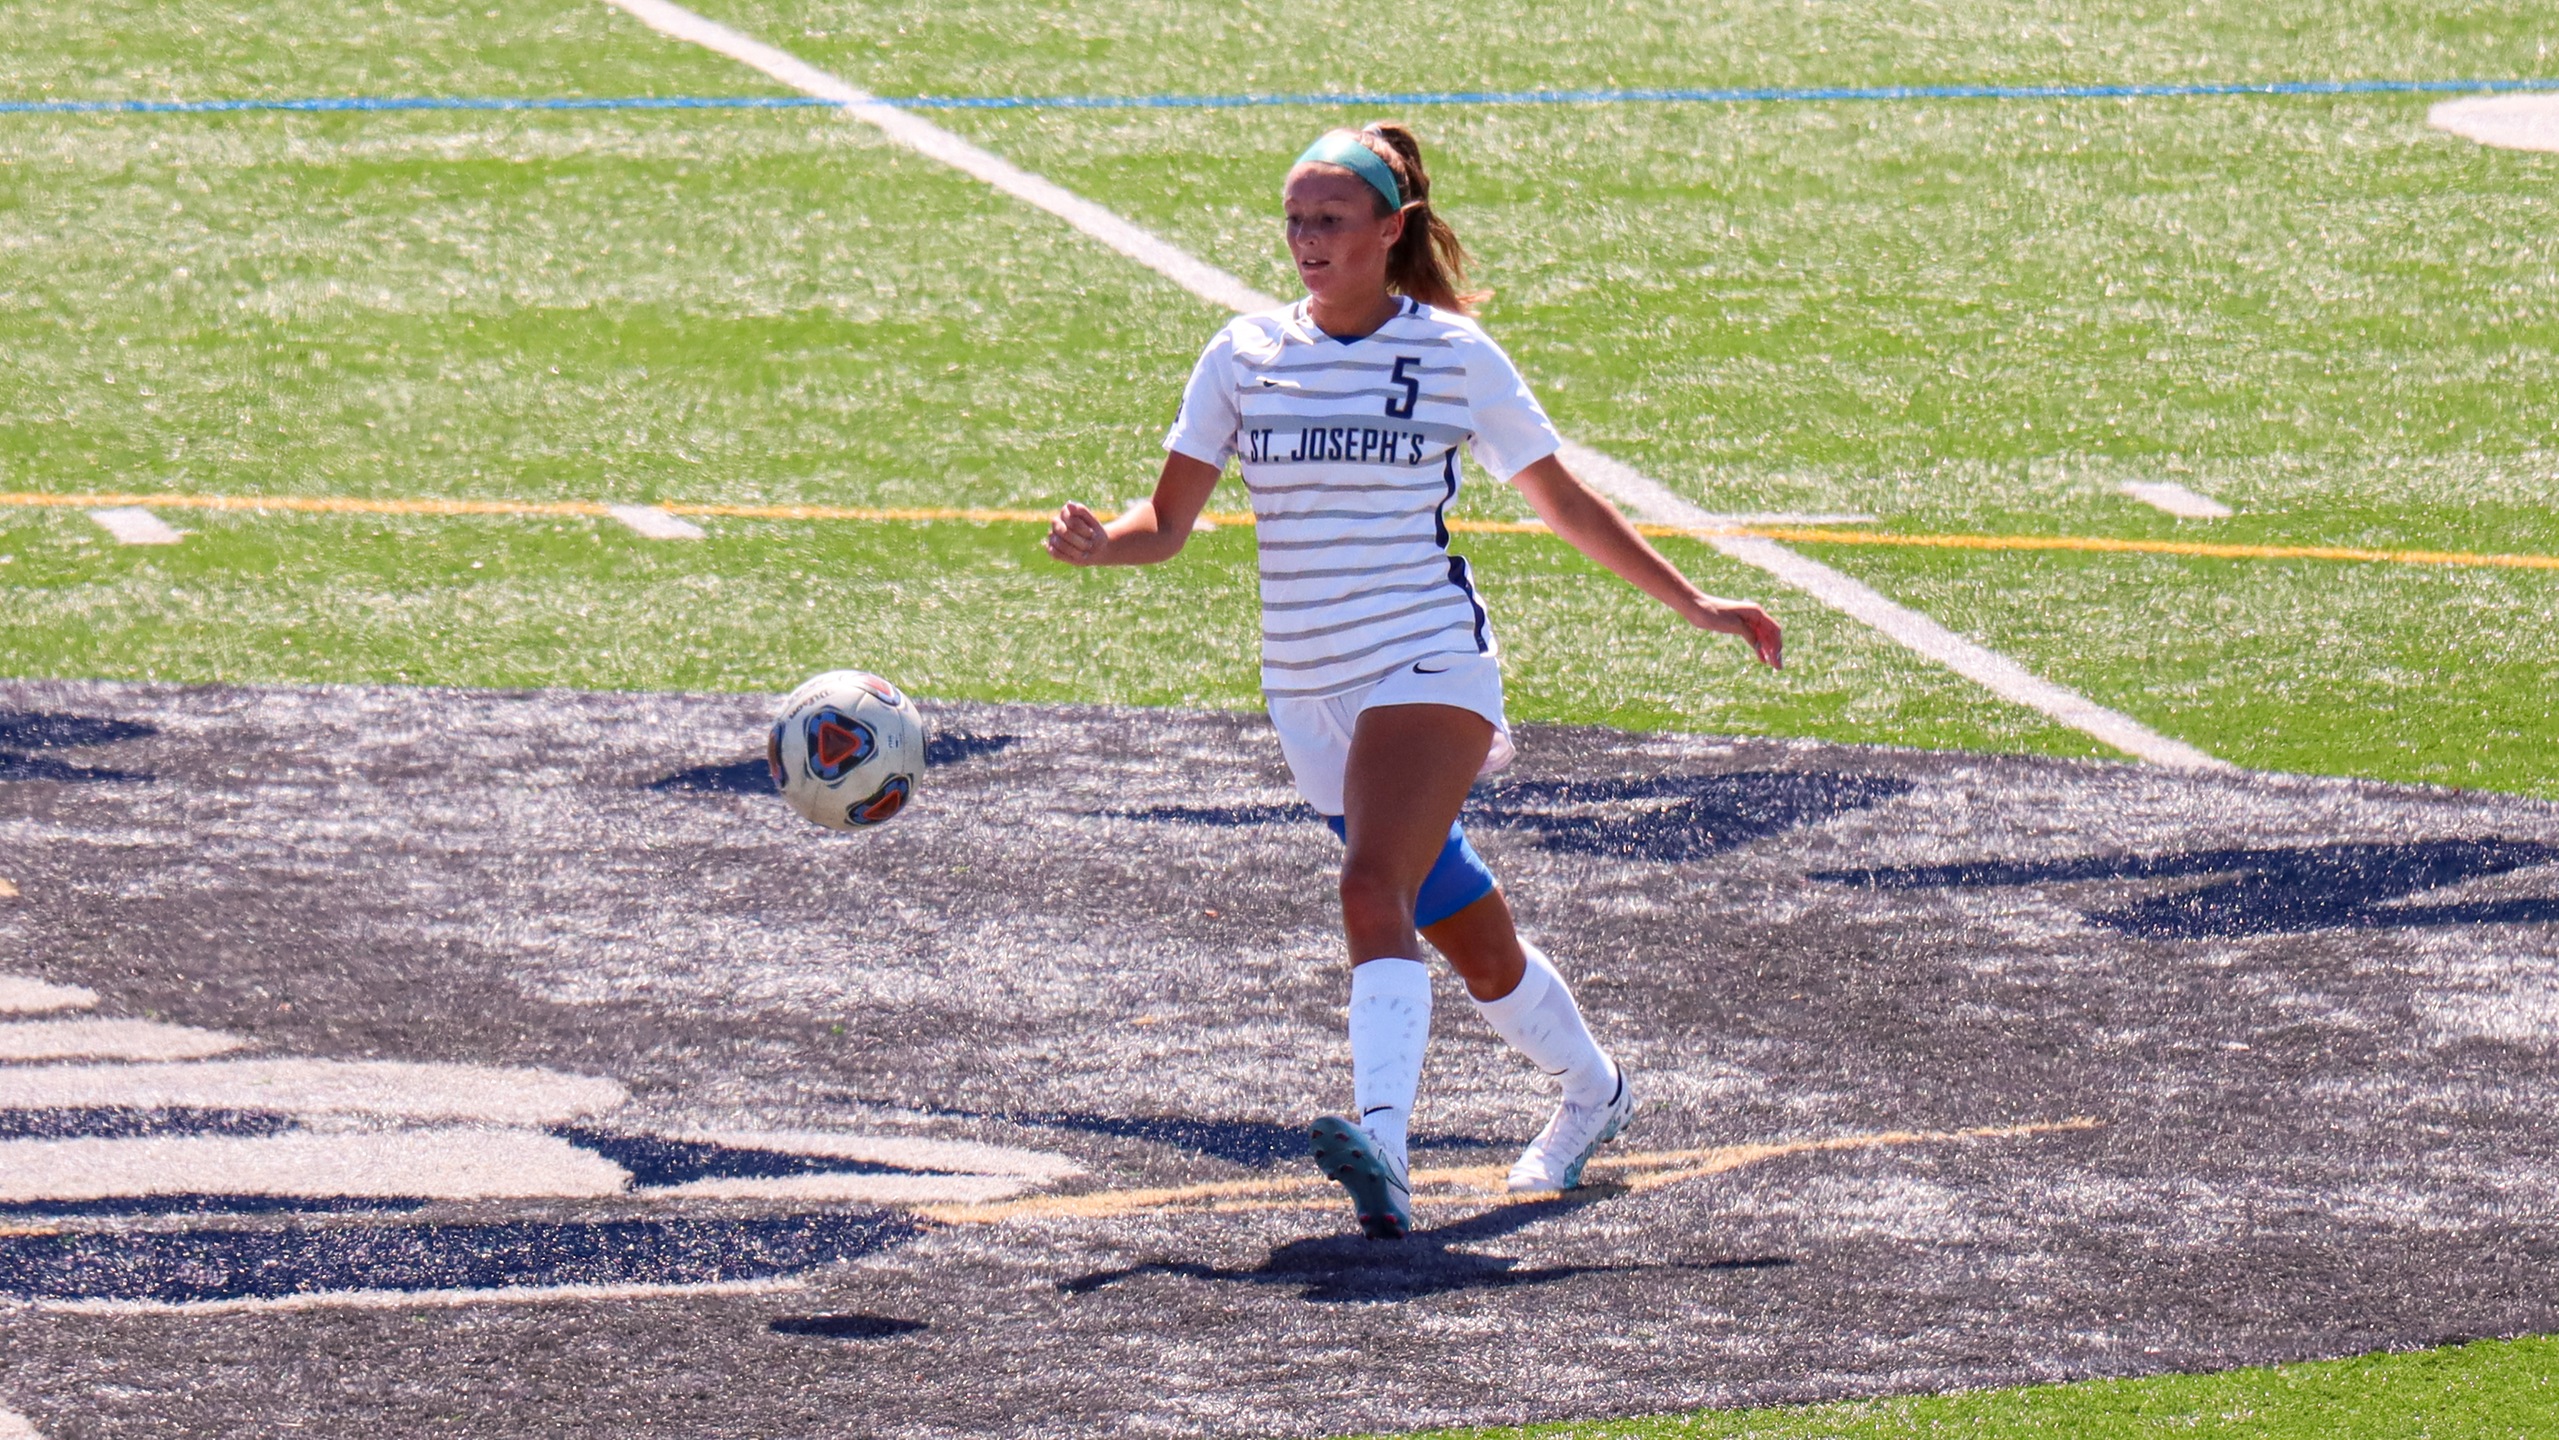 29th-Minute Goal Sees Maritime Sail Past Women's Soccer